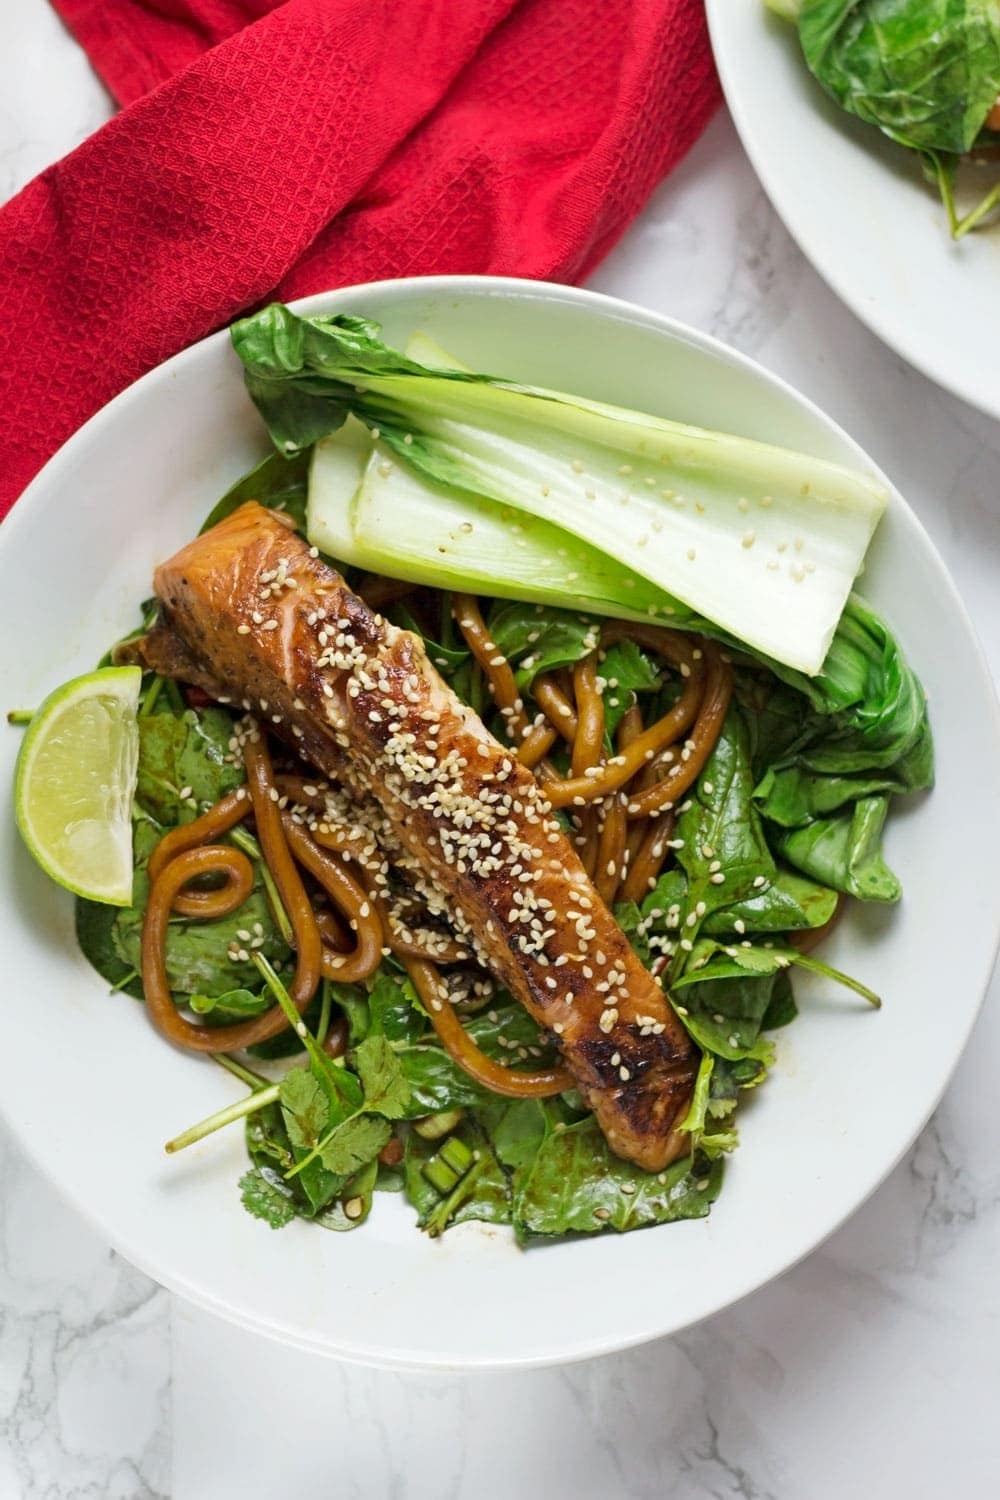 This fresh and healthy teriyaki salmon with udon noodles is a delicious summer dinner with a spicy kick. Serve with spinach and pak choi.